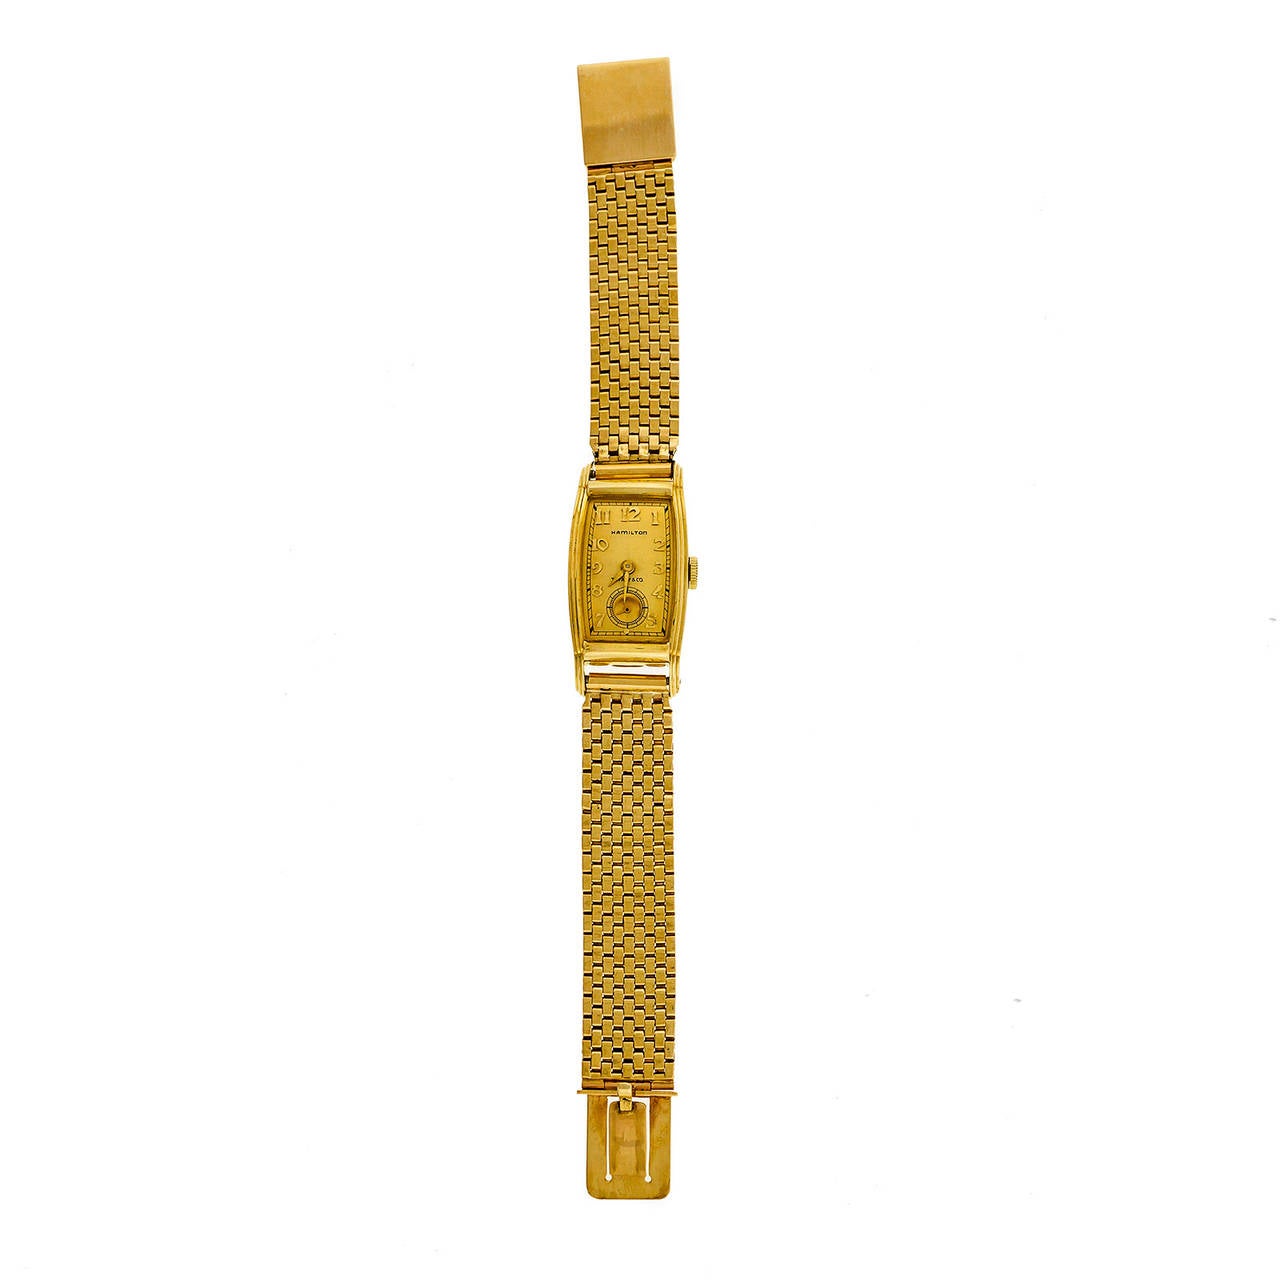 Hamilton Yellow Gold Tonneau Wristwatch, Retailed by Tiffany & Co., circa 1940s, with associated 14k yellow gold mesh bracelet.

14k yellow gold 
Length: 40.44mm 
Width: 20.75mm
Case thickness: 8.75mm 
Bracelet length: 7.25 inches 
Bracelet